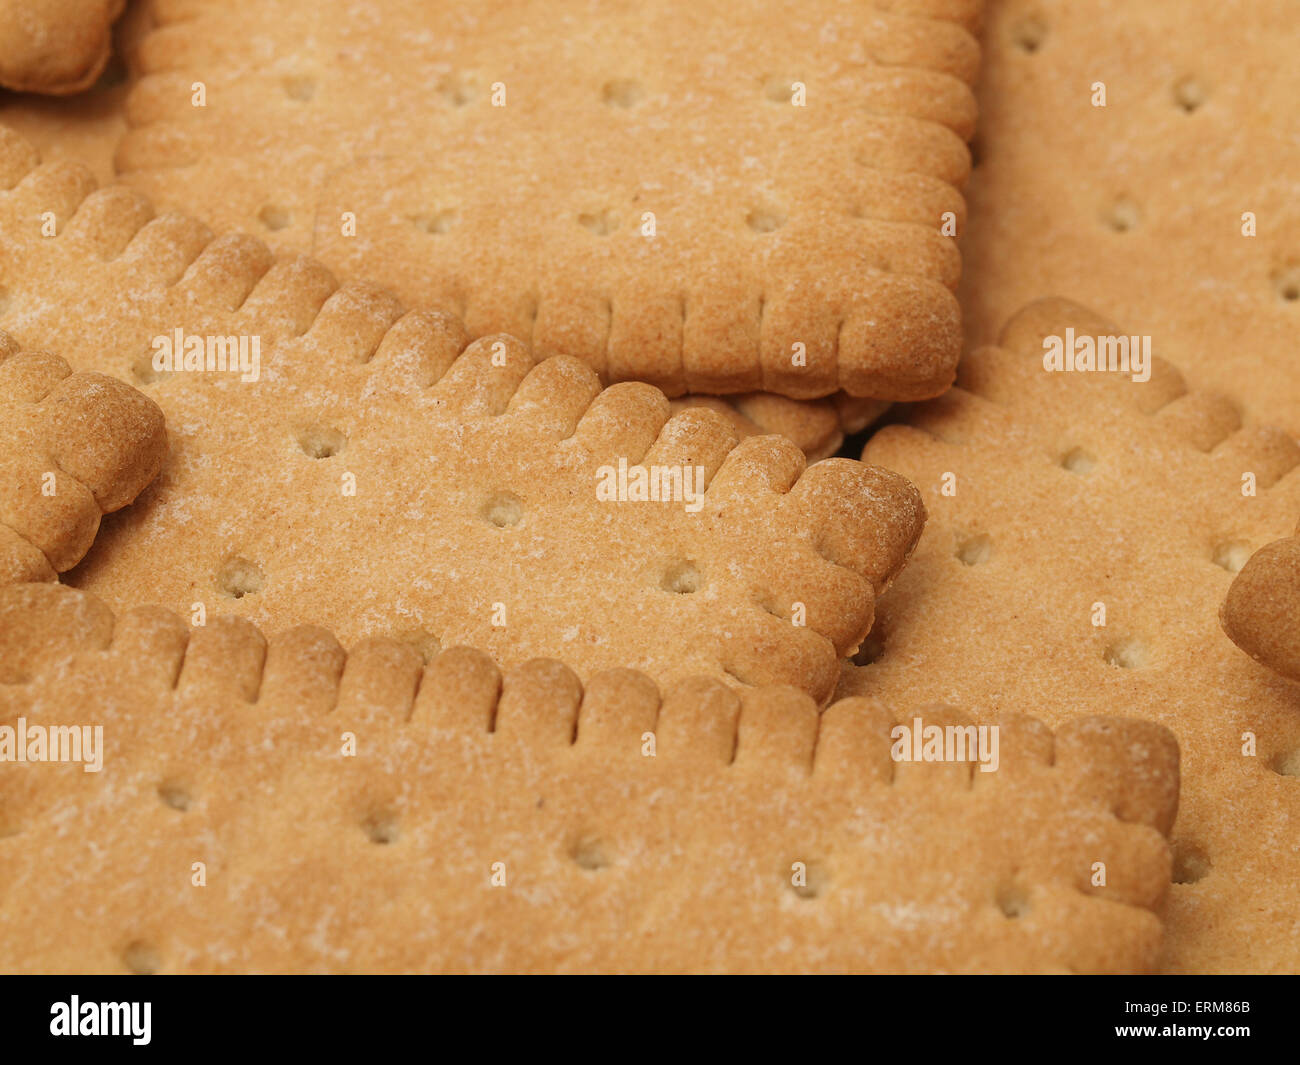 Tasty biscuits background Stock Photo